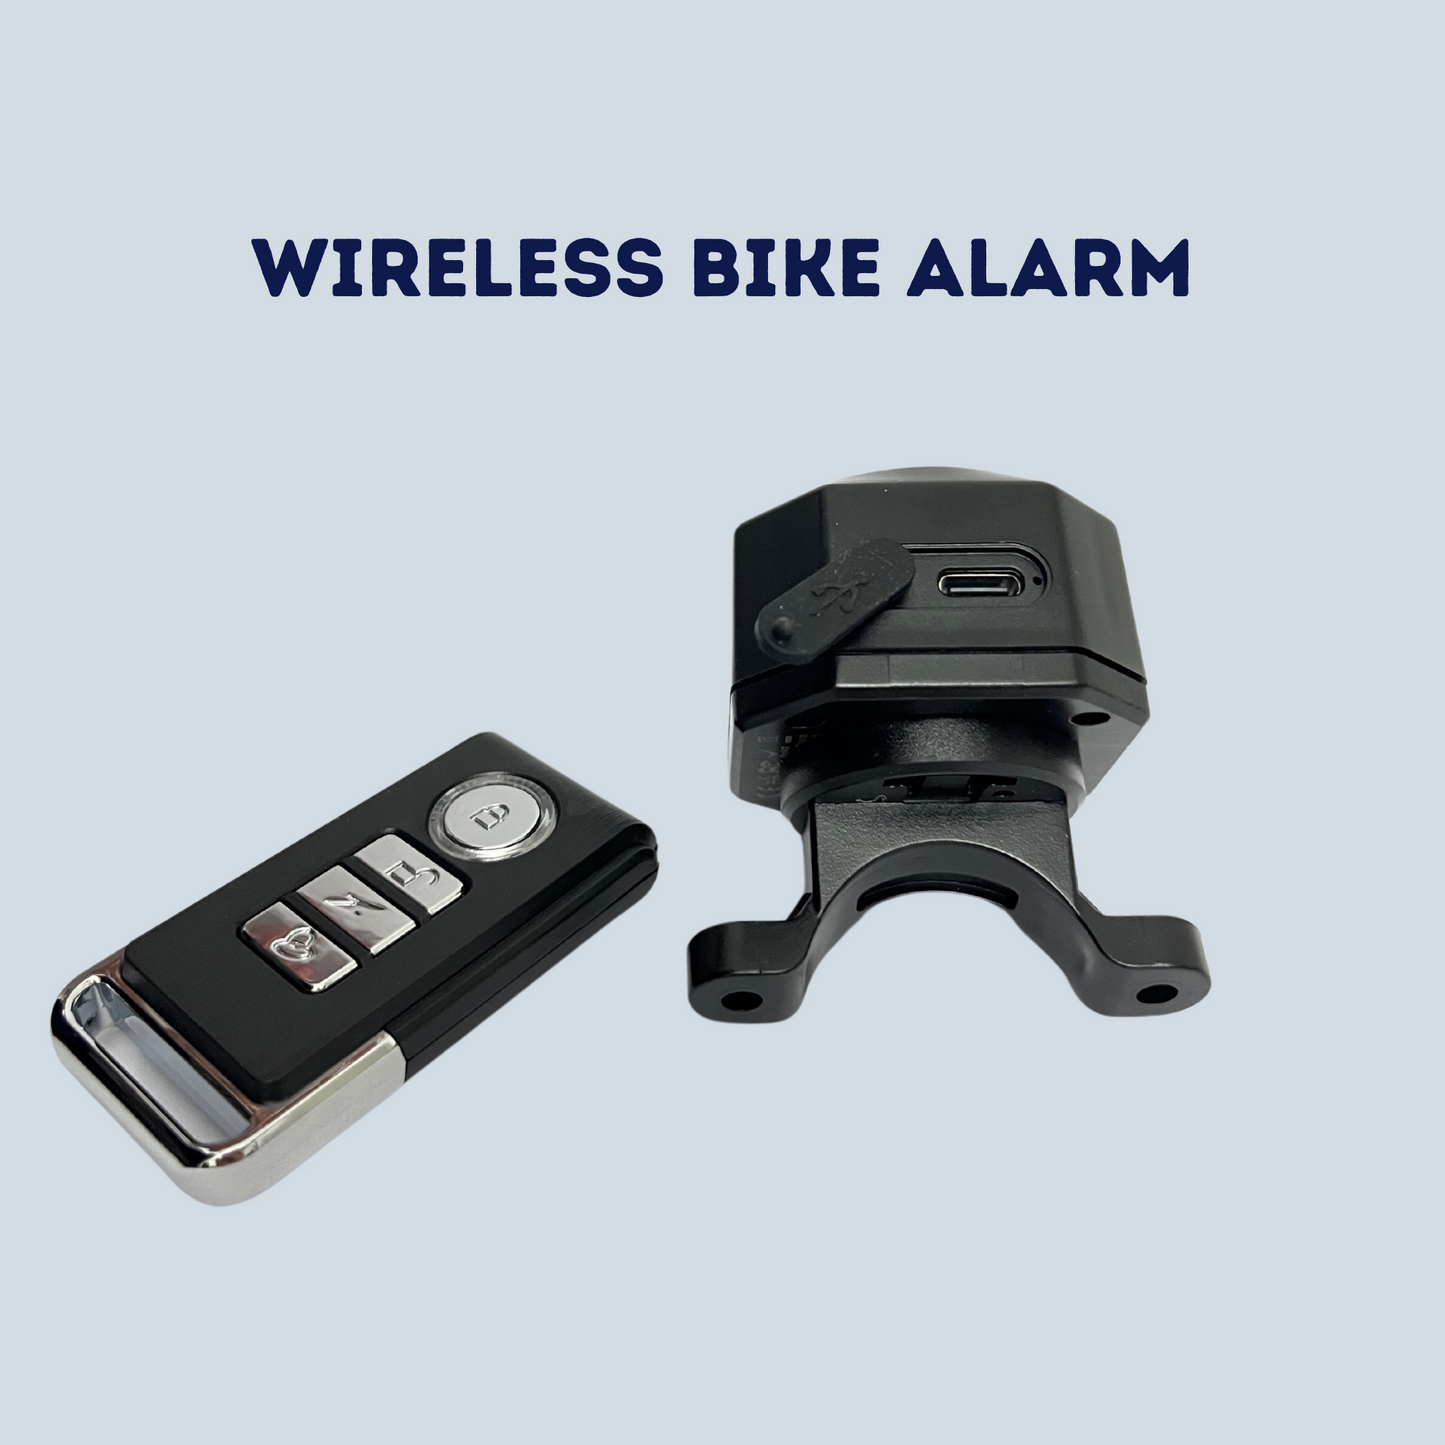 Rechargeable Wireless Bicycle Alarm - 110 dB - Reliable Sound - Take Precautions Against Thieves - Remote Control Available -  Waterproof